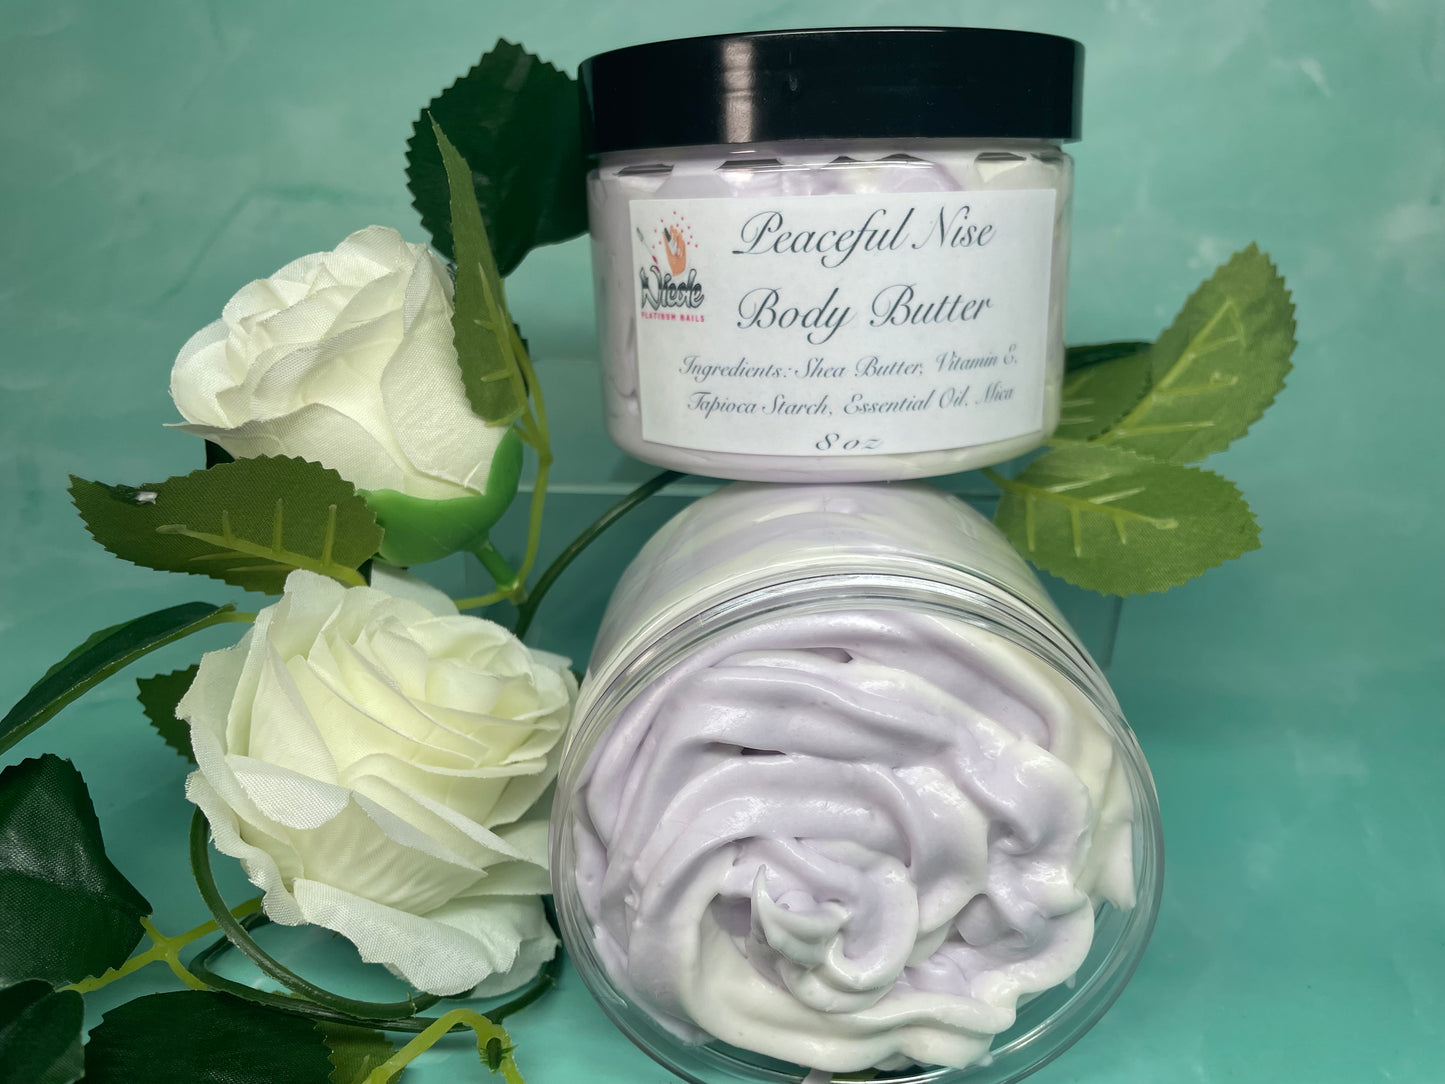 Peaceful Nise Body Butter